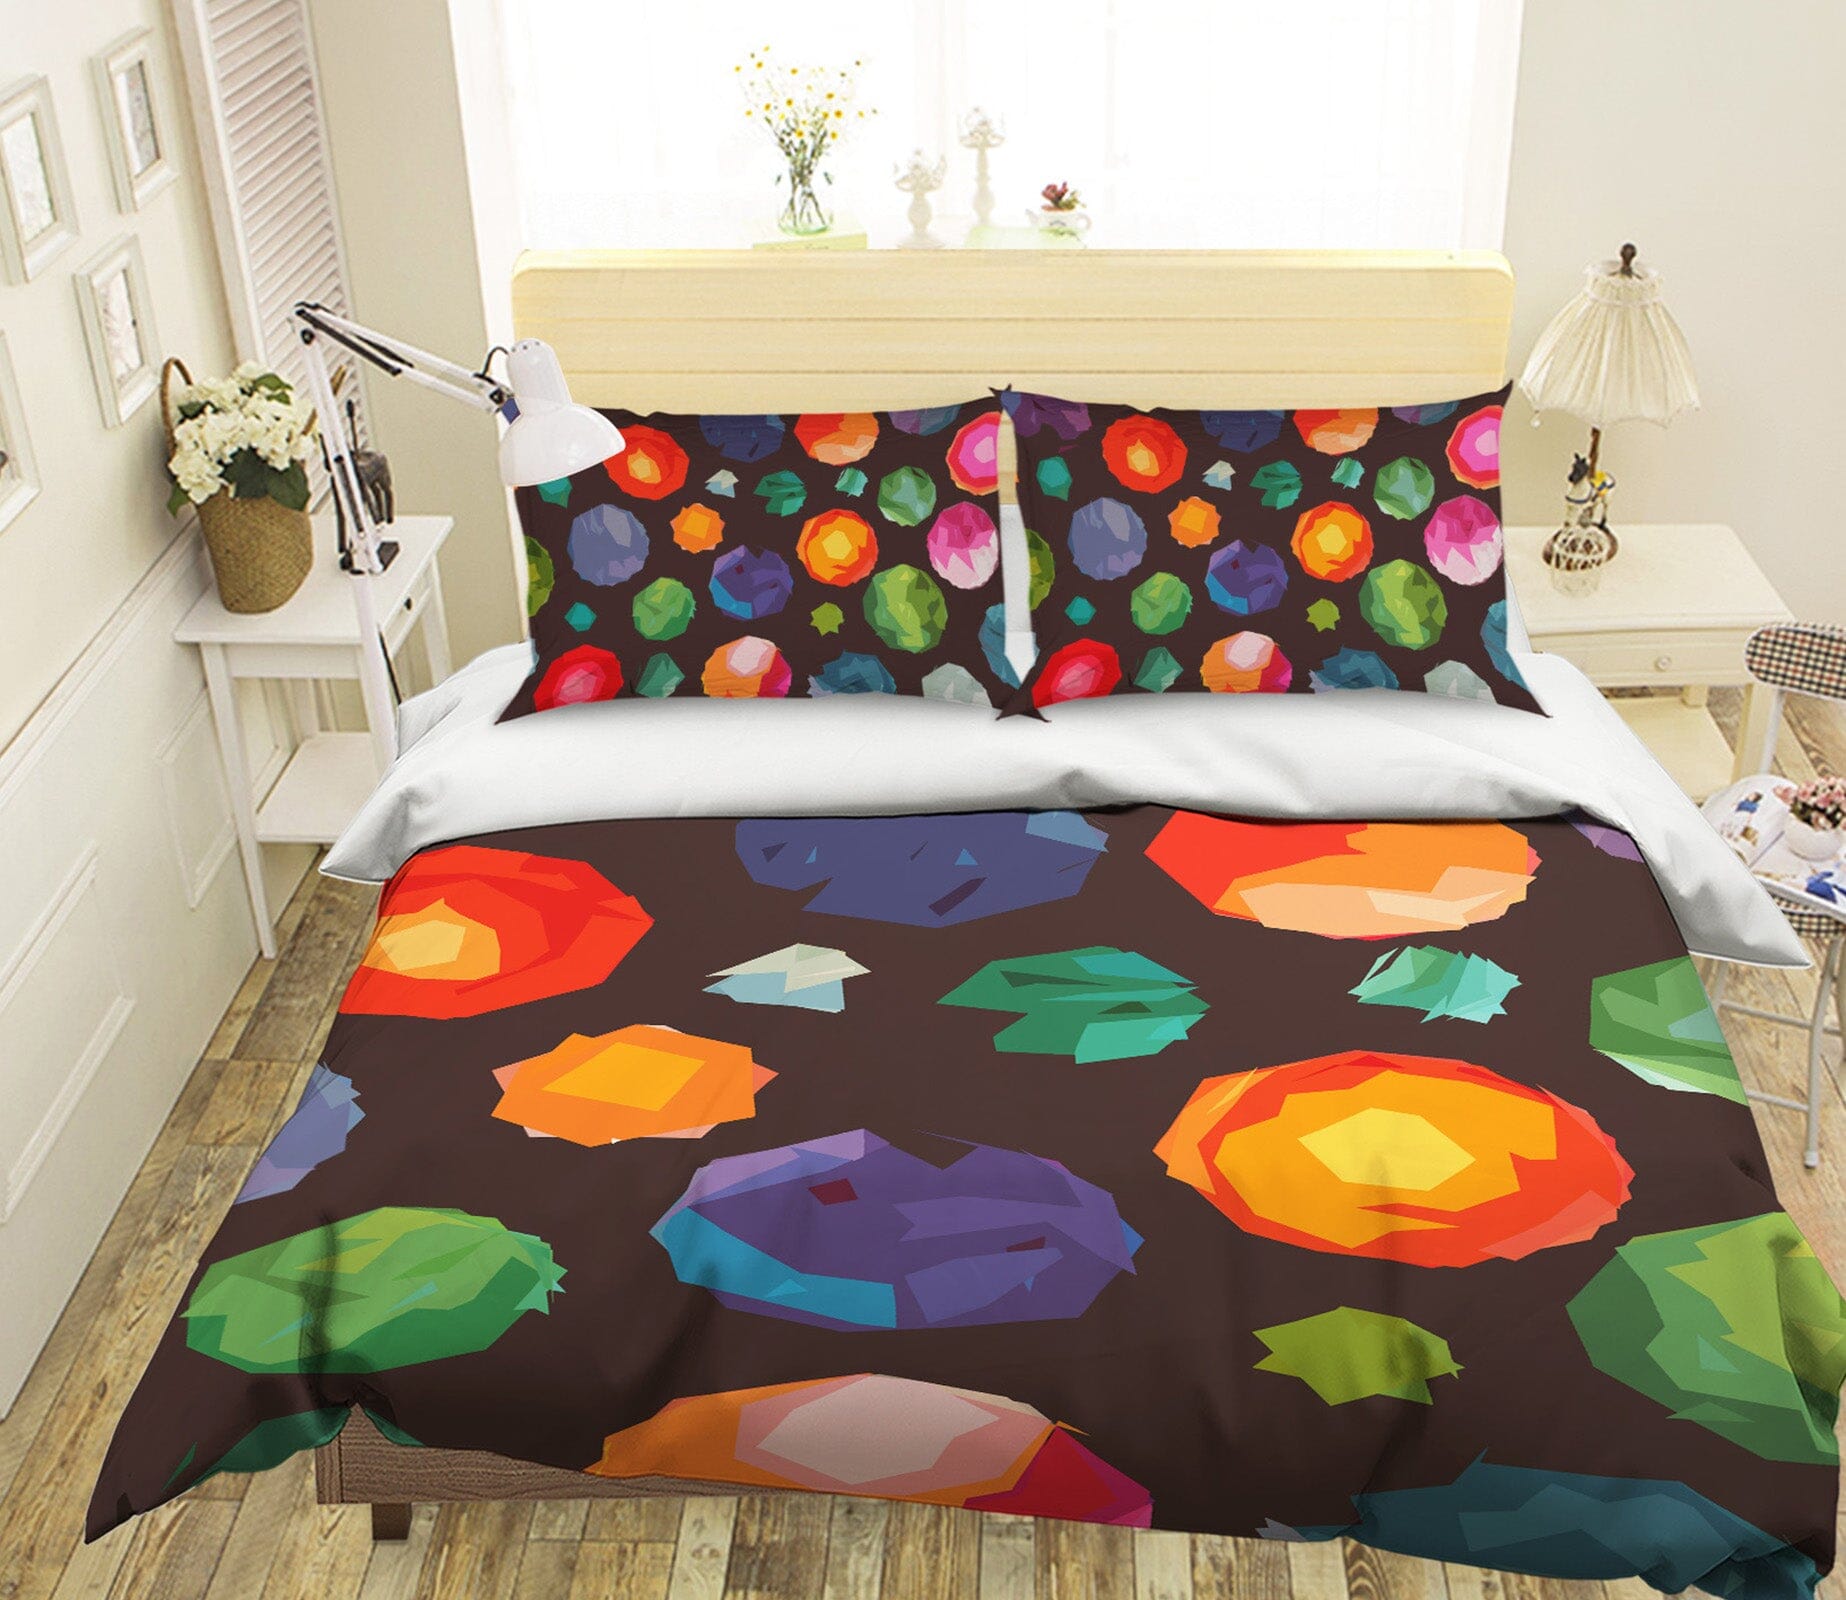 3D Colorful Balloons 2001 Shandra Smith Bedding Bed Pillowcases Quilt Quiet Covers AJ Creativity Home 